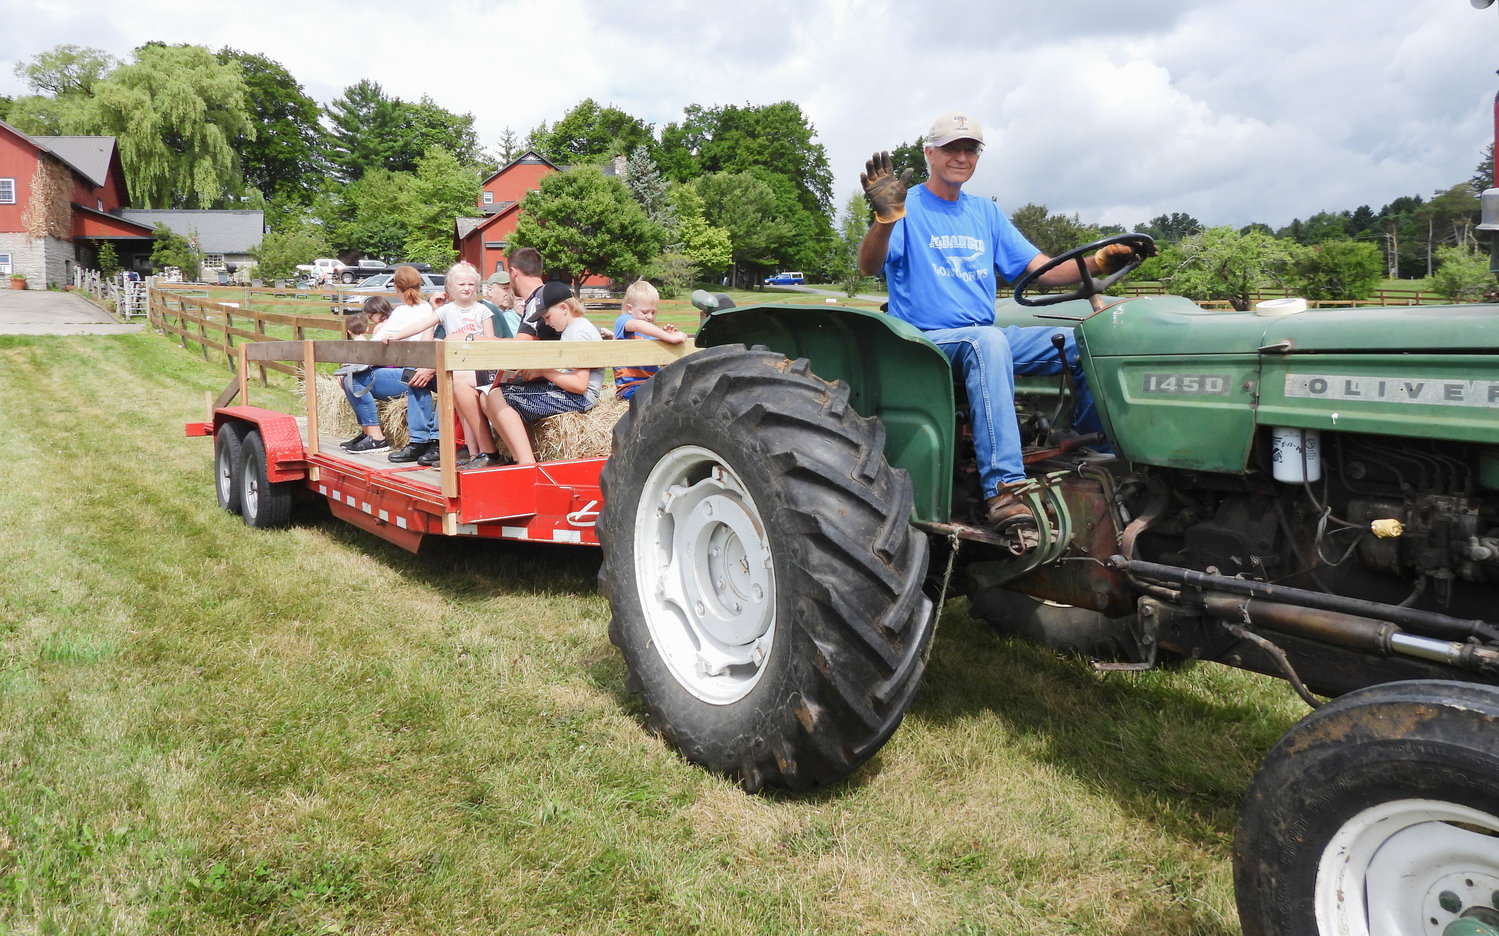 Michael Albanese, co-owner of Albanese Longhorns in Cazenovia, gives people a tractor ride around the farm. Open Farm Day on Saturday, July 30 saw people from all over visiting their local farms and seeing firsthand what they offer to the community.